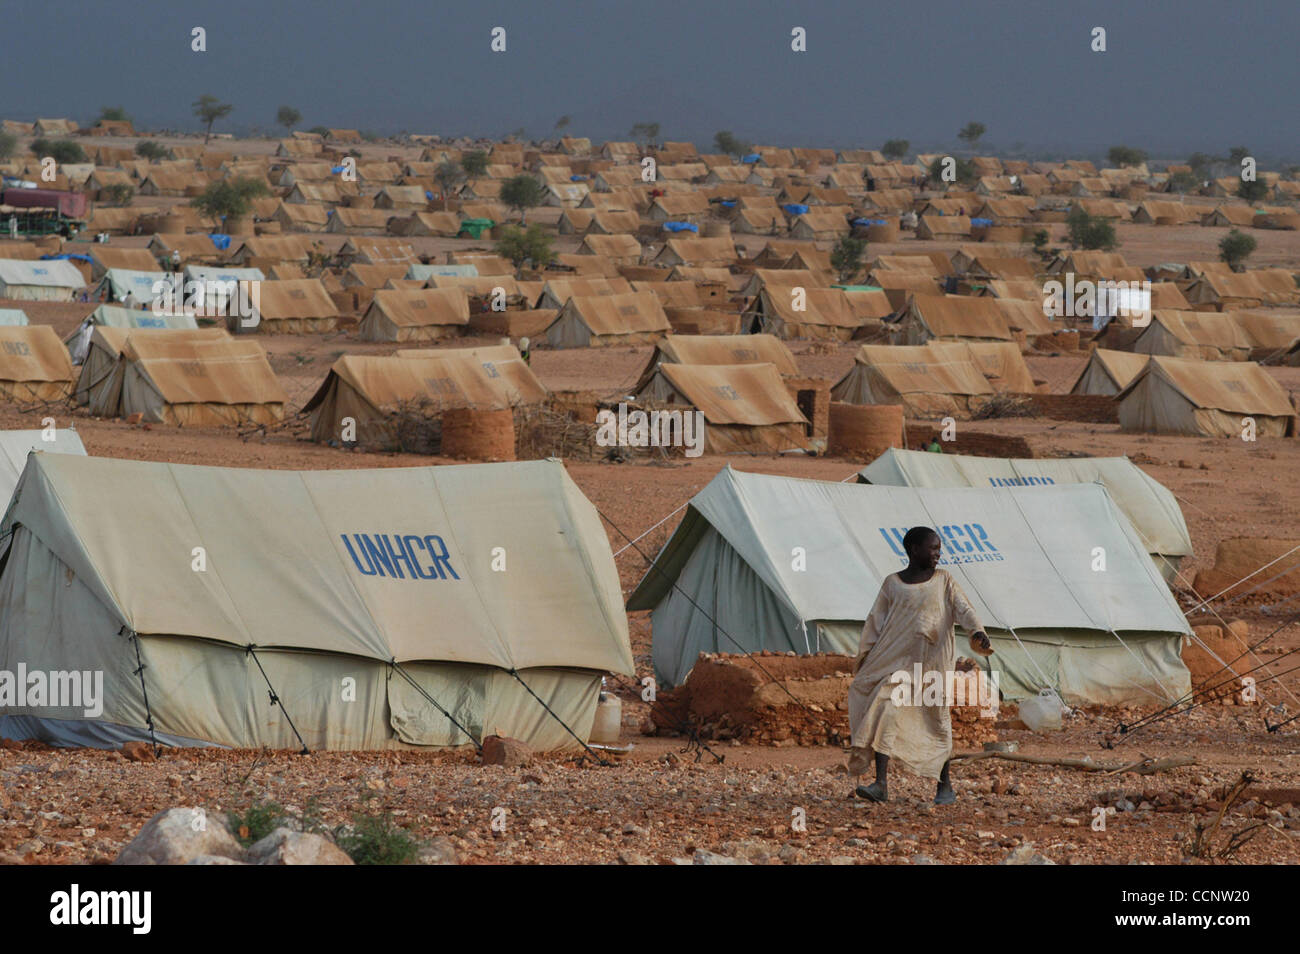 July 16, 2004, Abeche, Chad - A boy walks amid the thousands of tents provided by the United Nations High Commisioner for Refugees that make up a massive camp  for refugees from Darfur. (Credit: David Snyder/ZUMA Press) Stock Photo